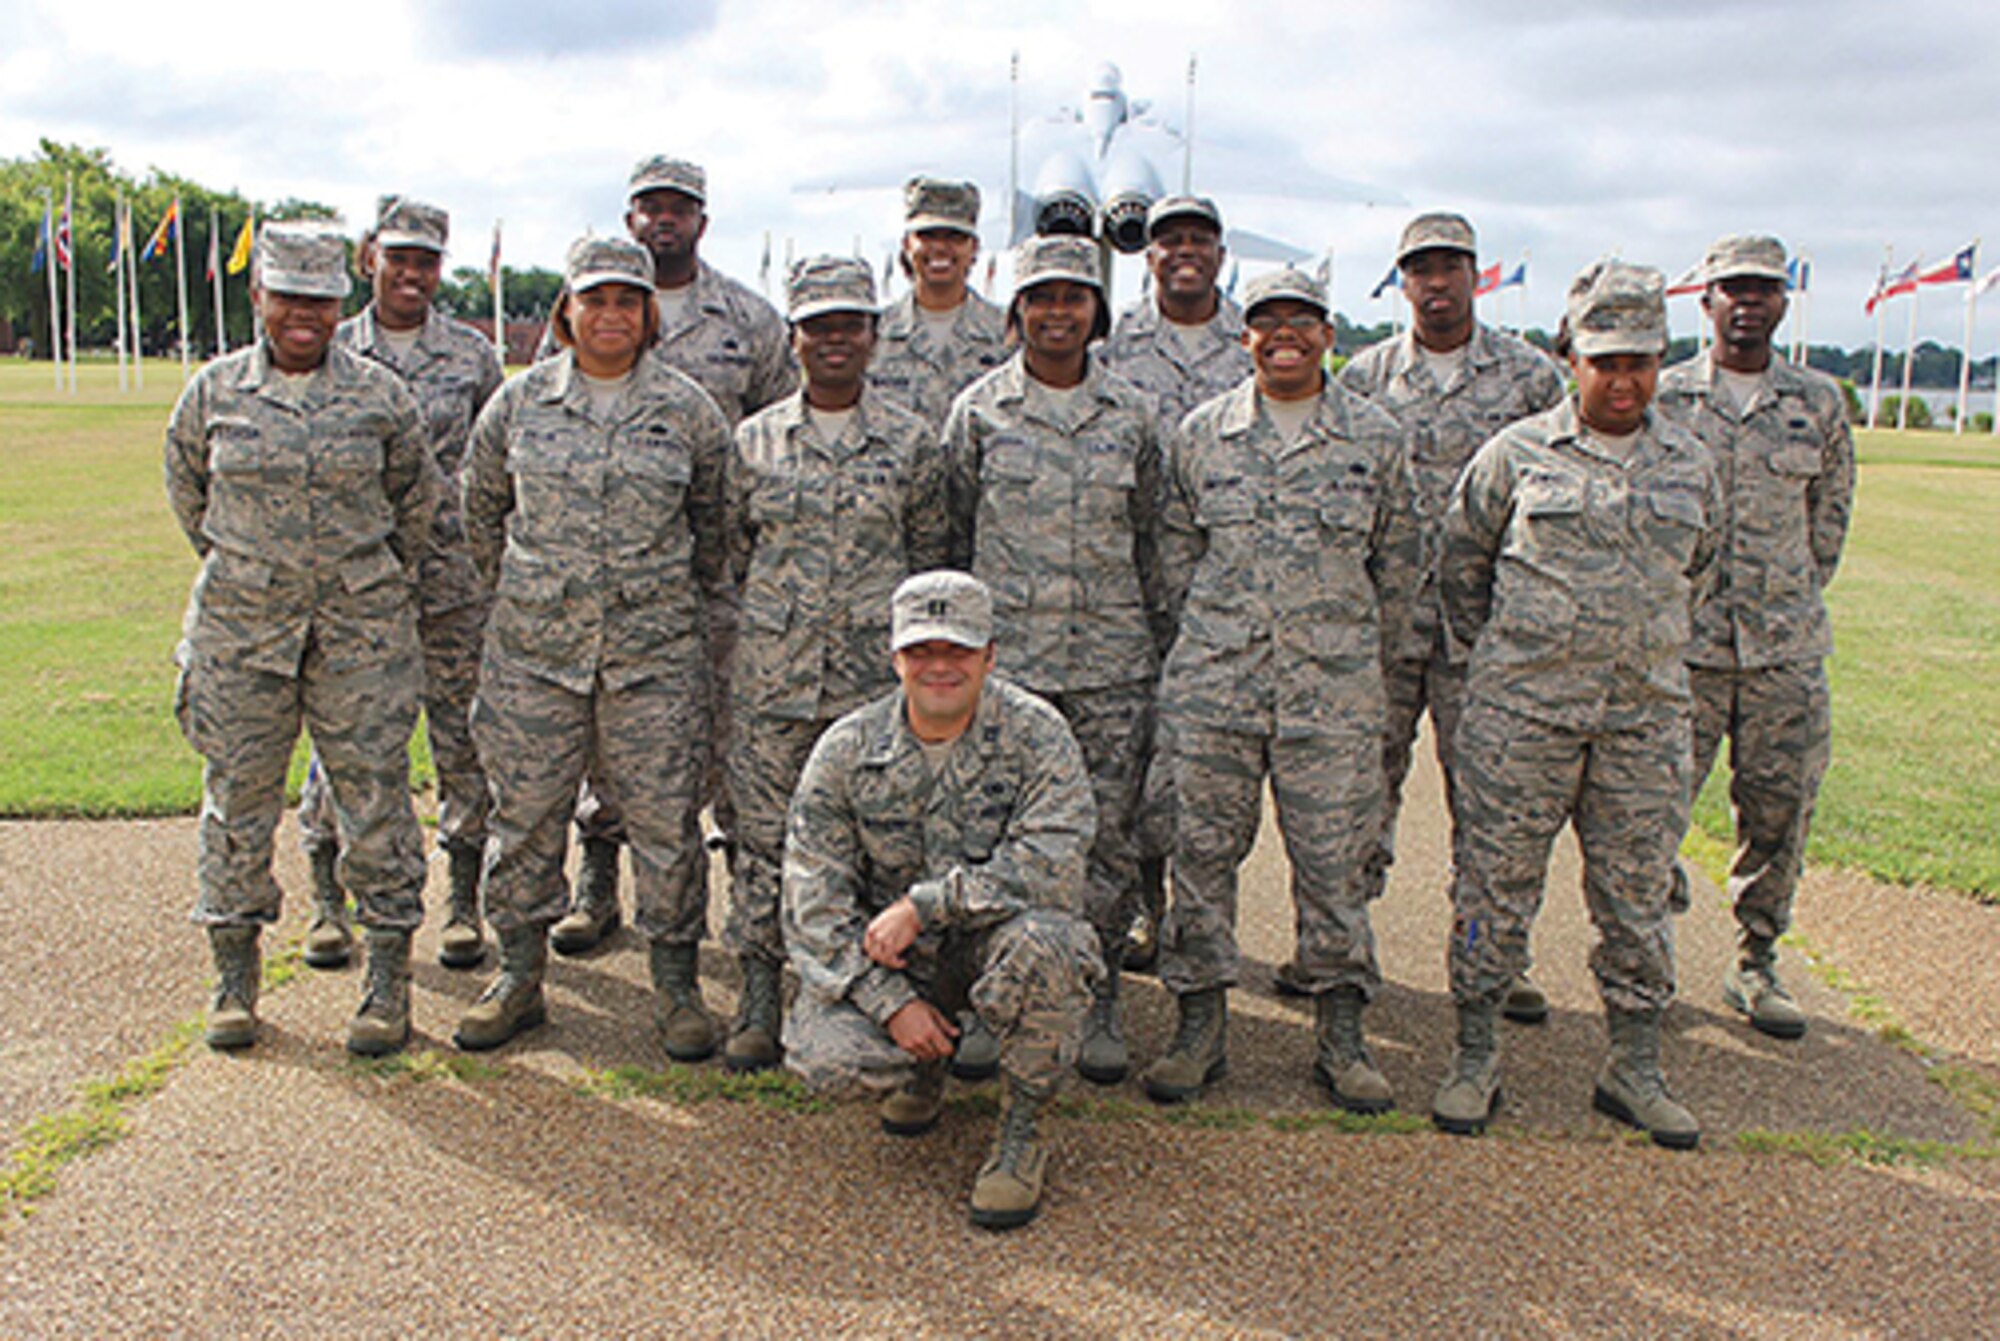 Airmen of the  908th Logistics Readiness Squadron set out on annual tour to Joint Base Langley-Eustis, Va. Members of the Materiel Management team are: Senior Airman Kendria Alexander, Airman First Class Brittney Jenkins, Tech. Sgts. Renee Fuller, D. Johnson, Eva Appiah and Kanika Blackmon, Staff Sgt. Tiffany Johnson, Master Sgt. Quintin Rudolph, Tech. Sgt. Kenneth Fontenot, Senior Airman Christopher Hardin, Airman Shaundella Dowdell, Senior Airman Demonte Powell and Capt. Eric Withers.